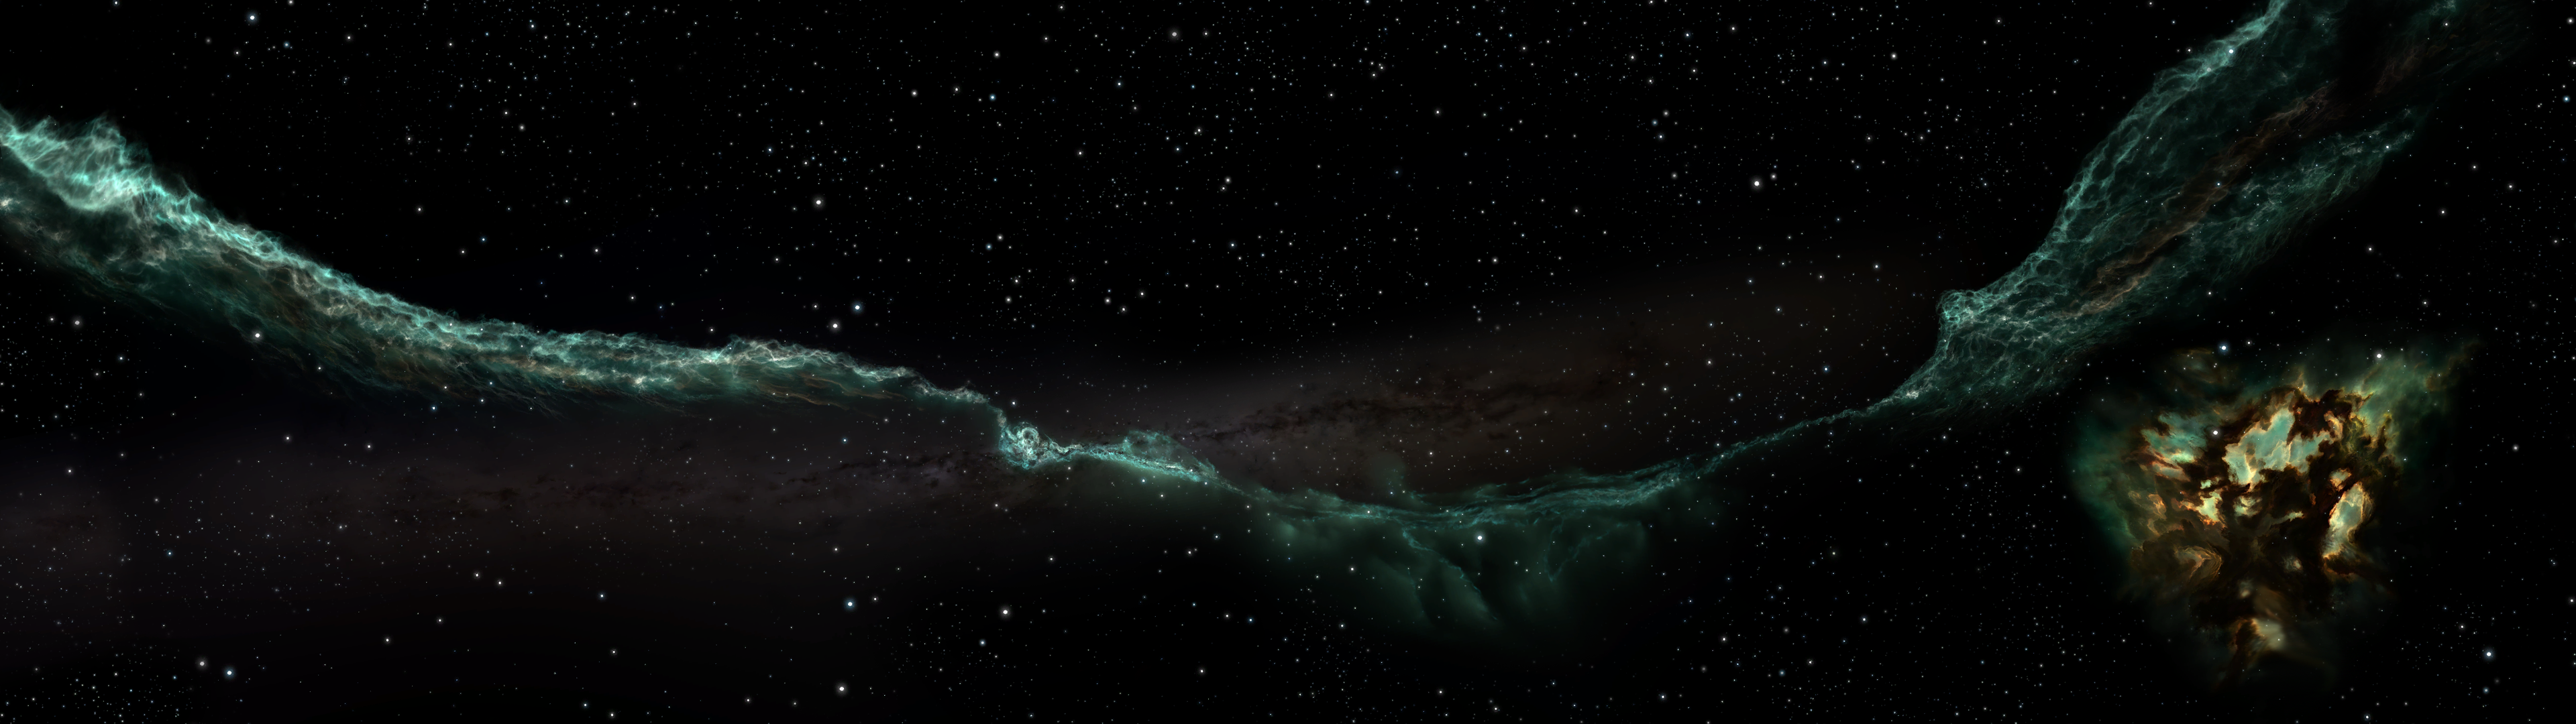 Panoramic Wallpaper Eve Online Nebula Pics About Space